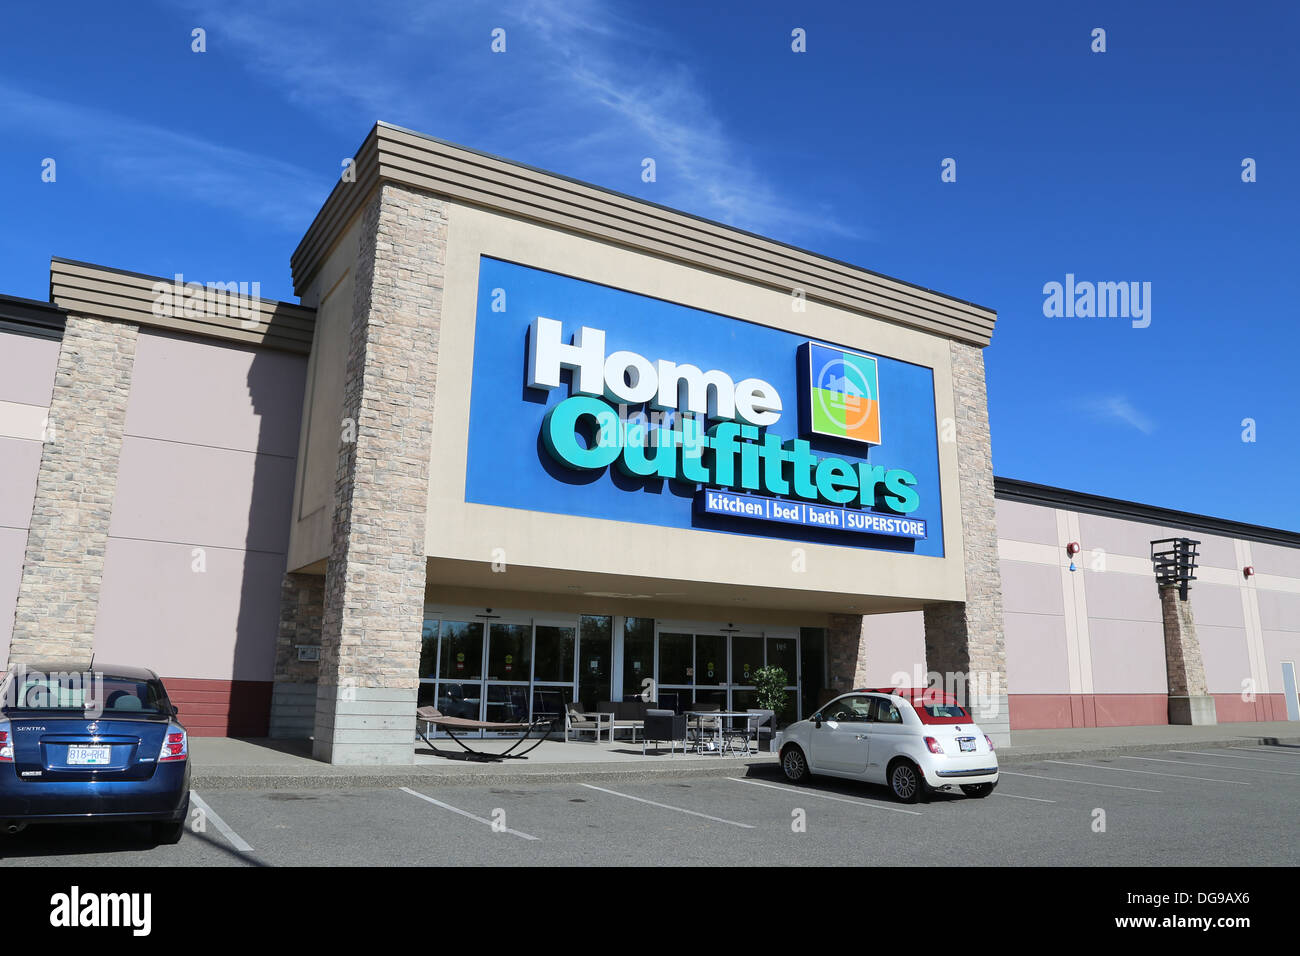 Home outfitters furnture store Stock Photo